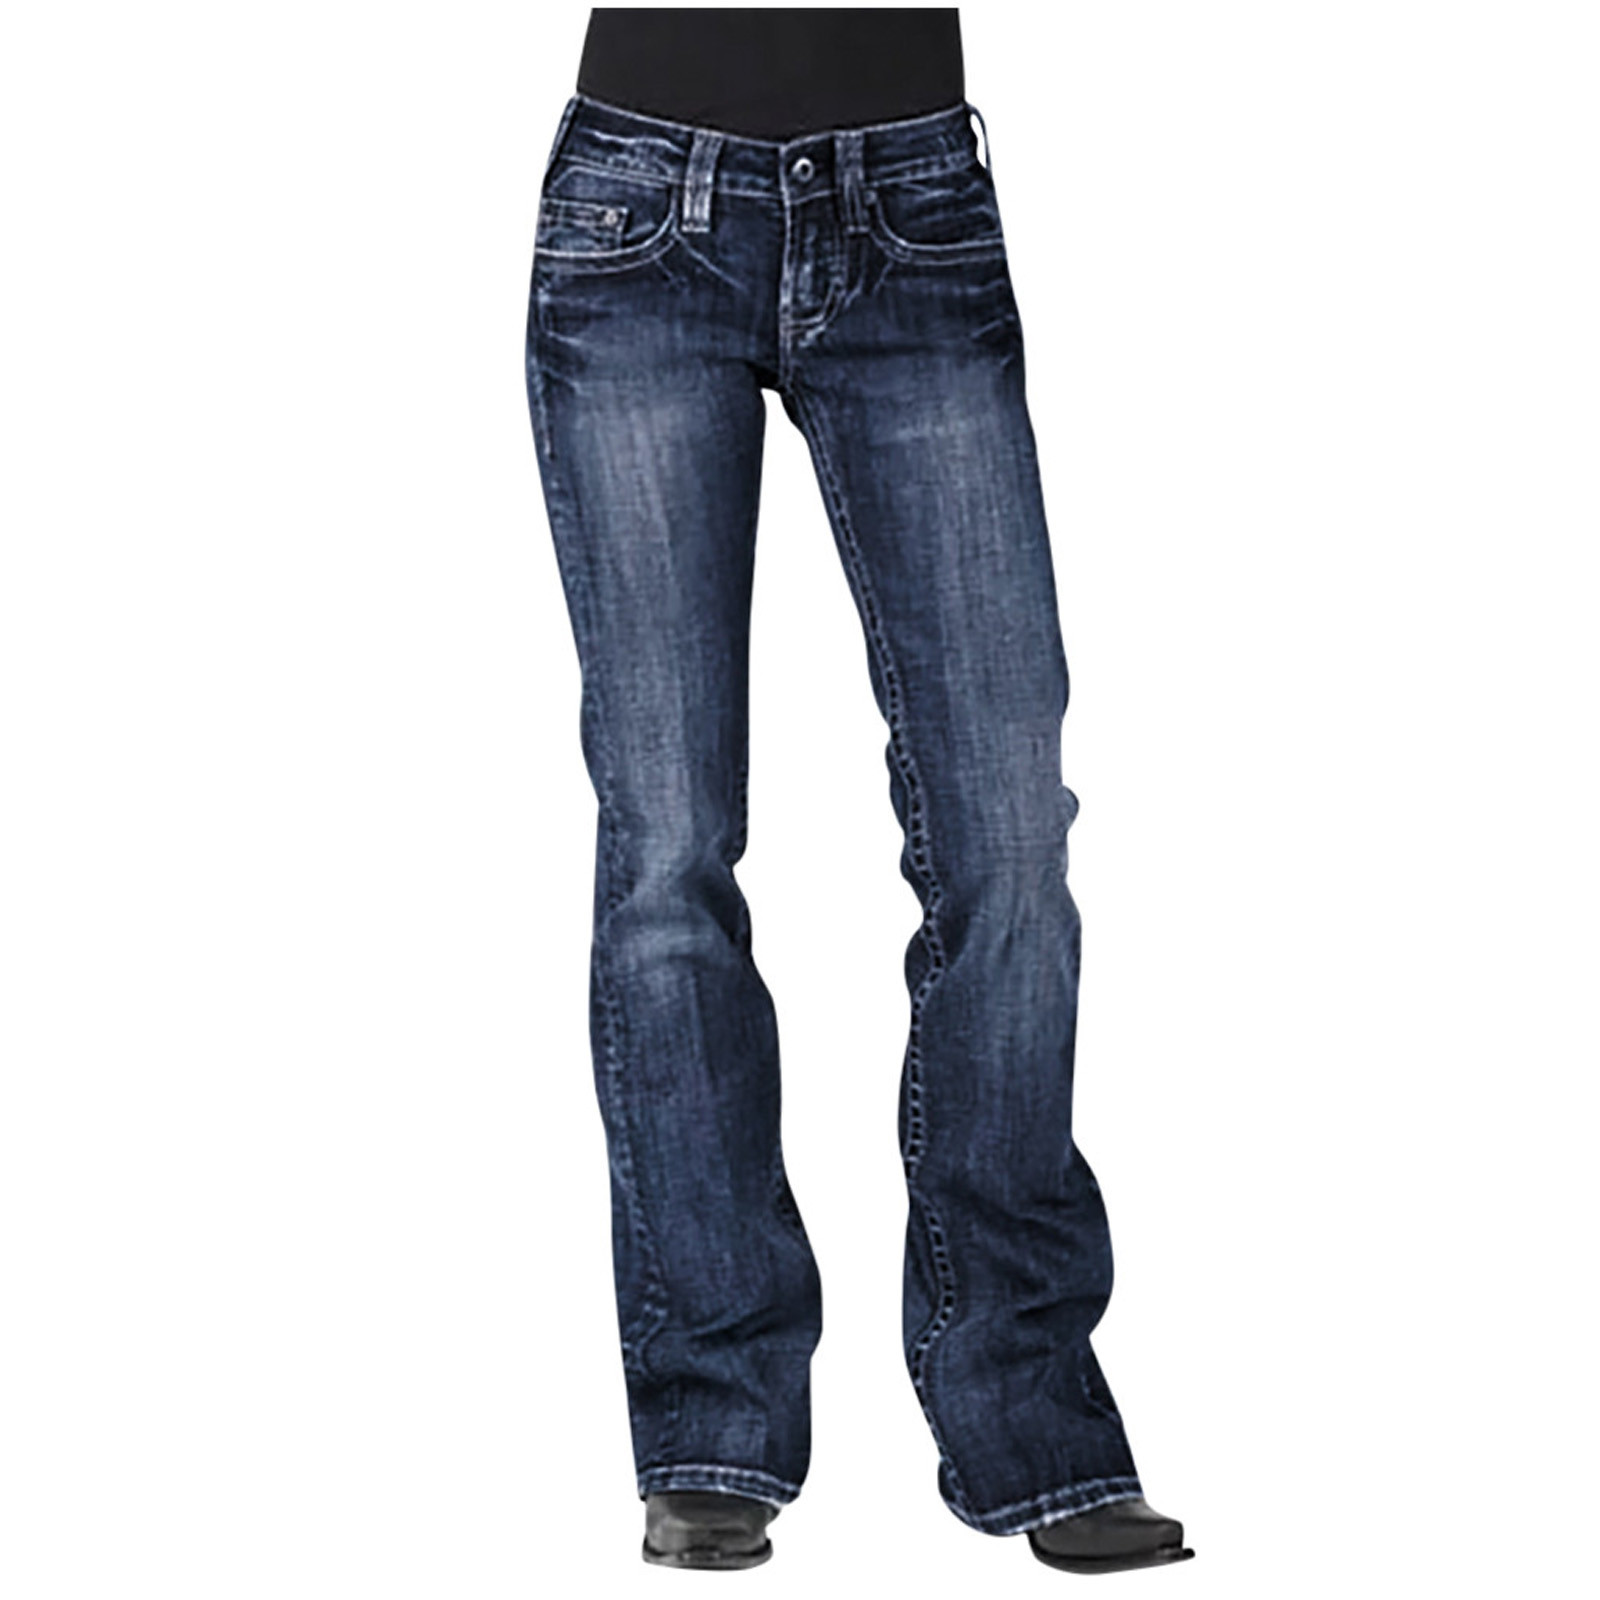 Giftesty Womens Pants Clearance Women Mid Waisted Denim Jeans ...